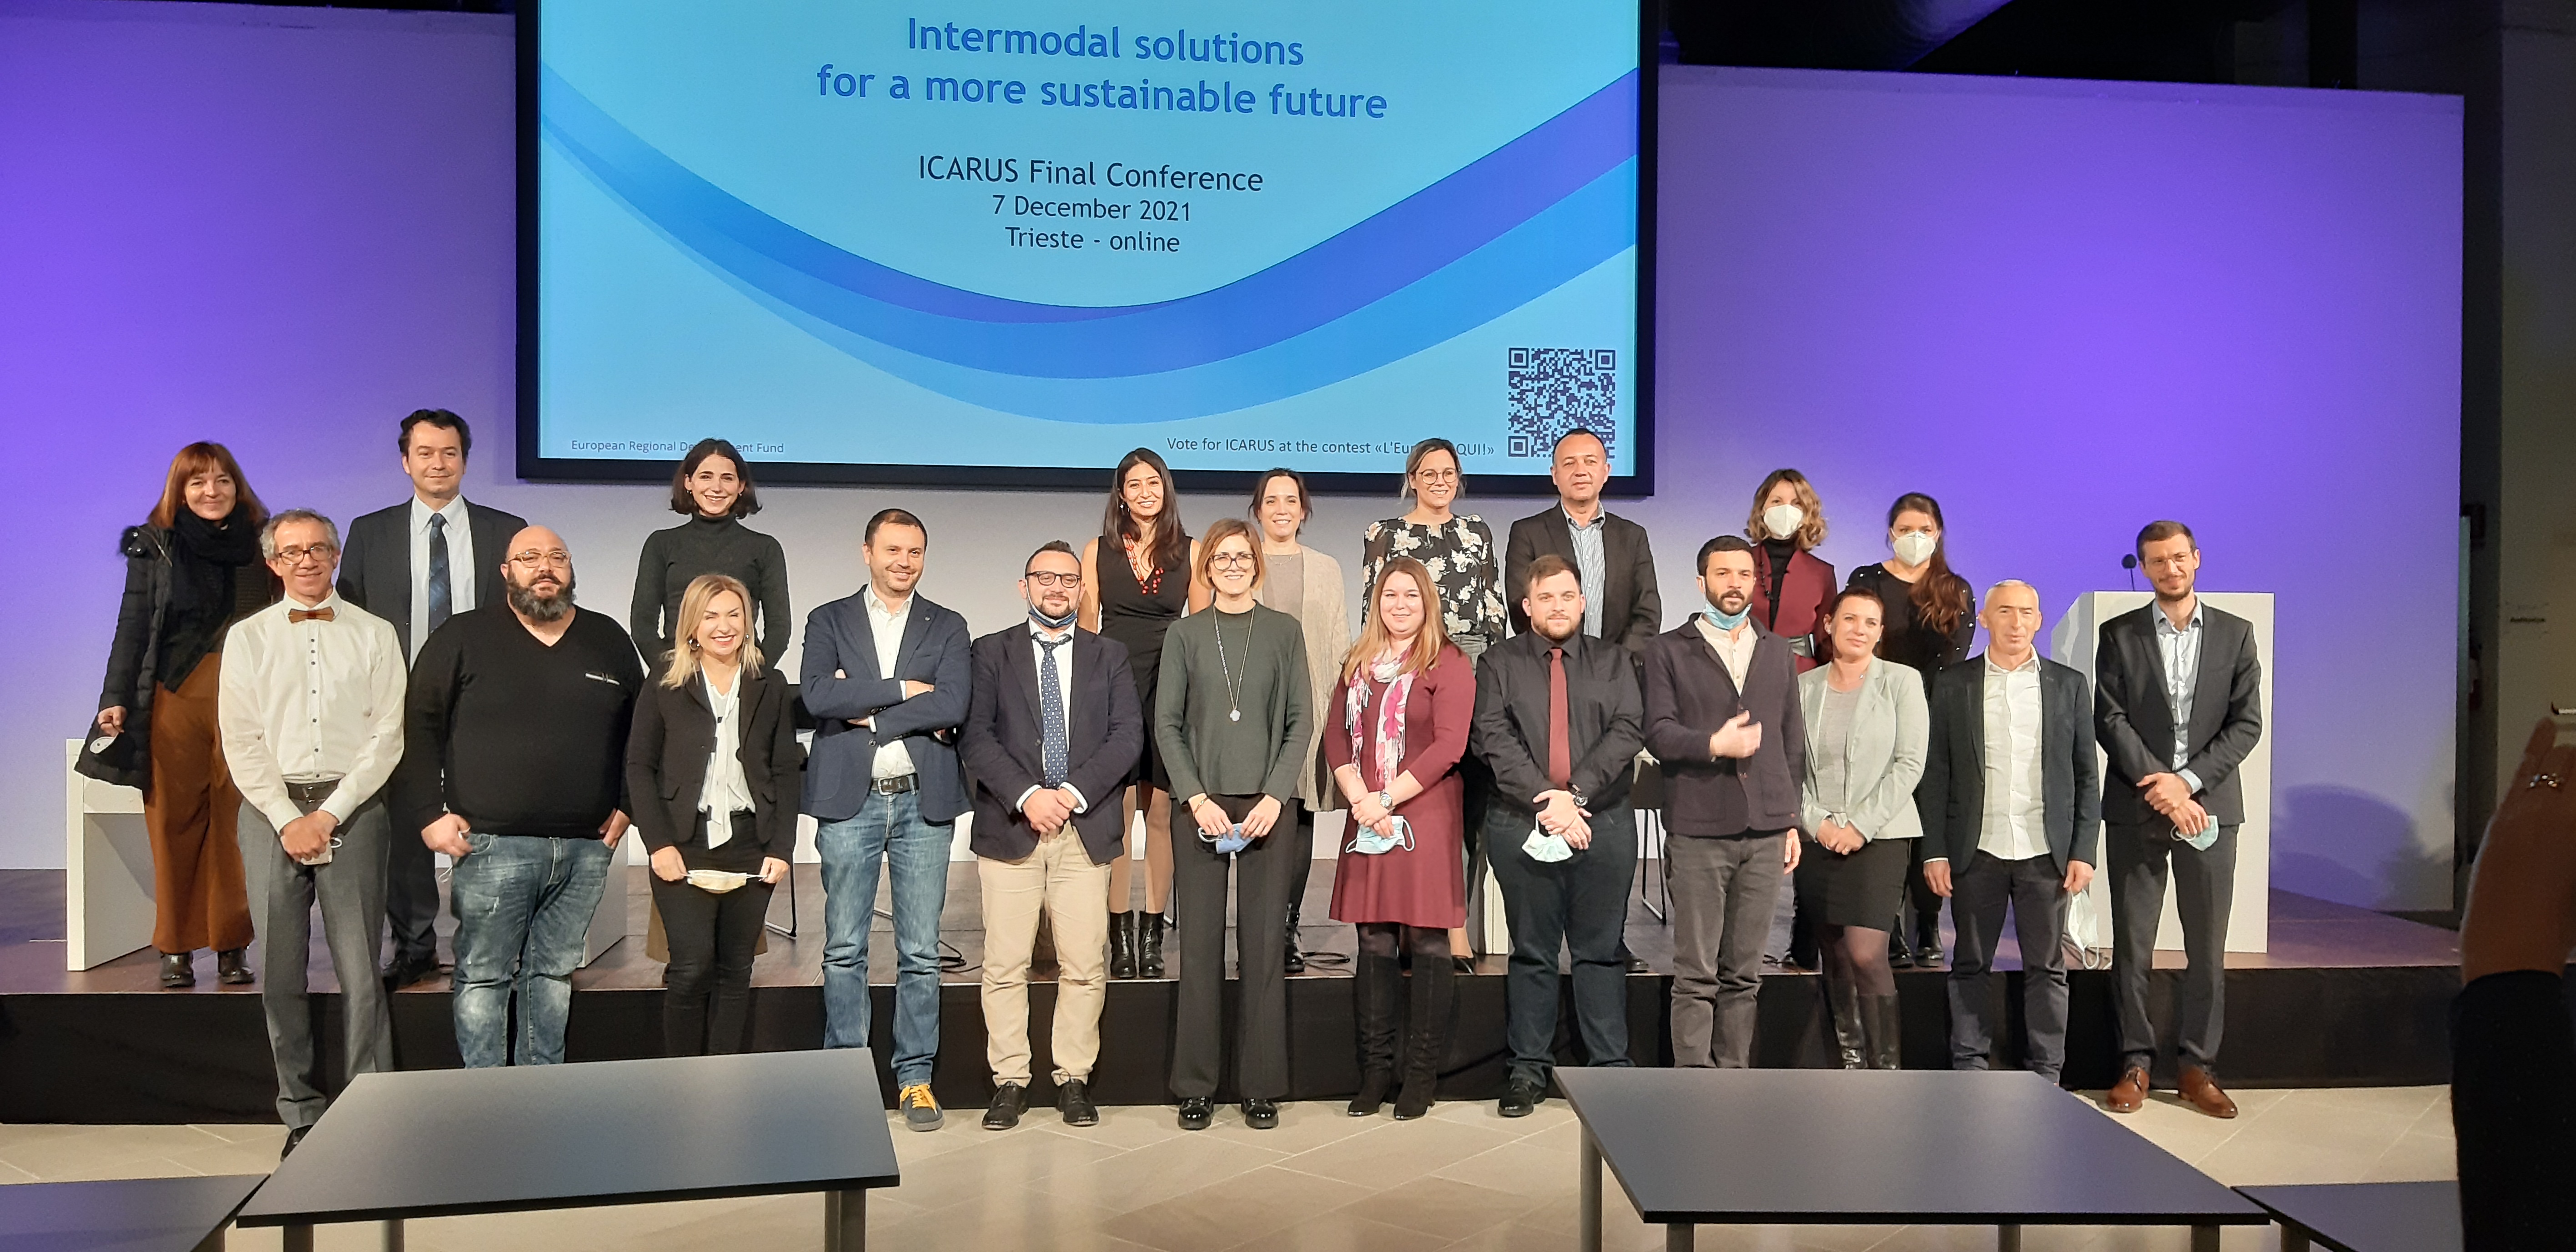 ICARUS Final Conference held in Trieste